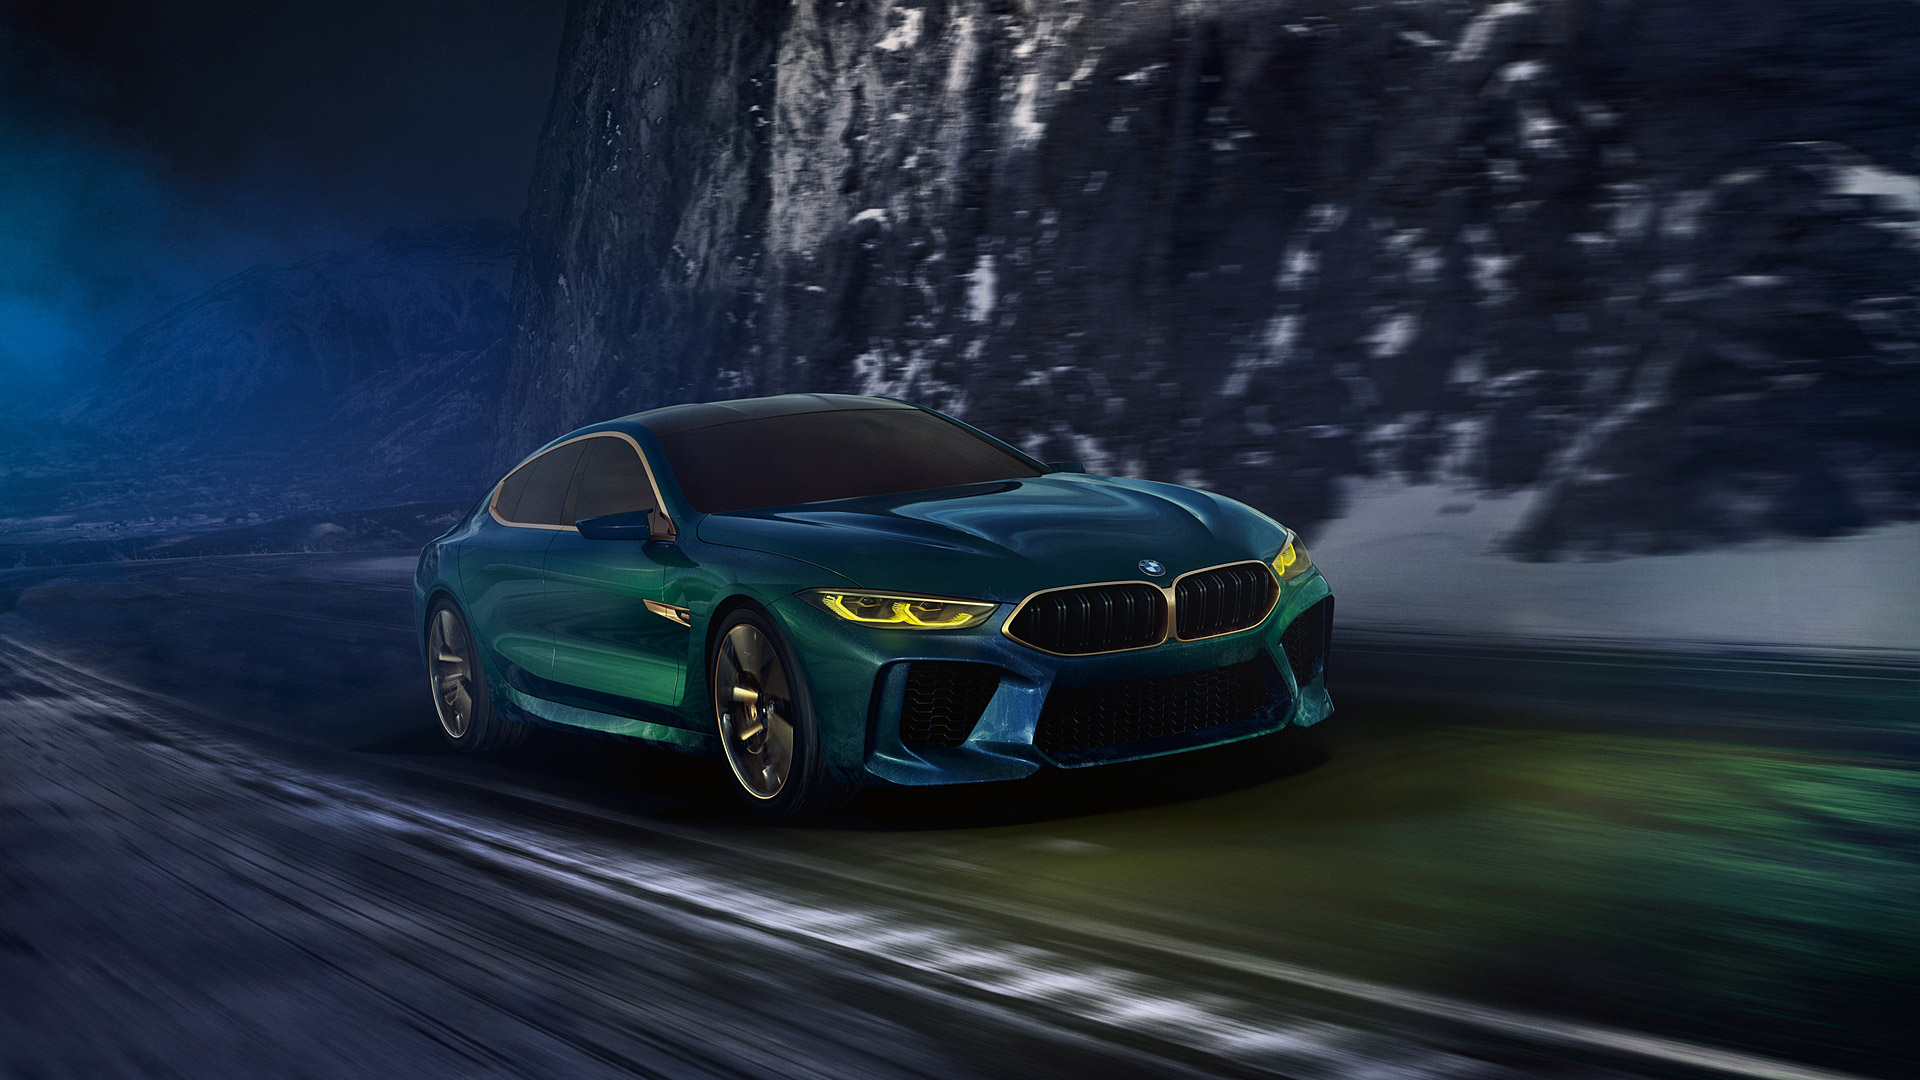 Bmw M8 Gran Coupe Concept Wallpaper HD Image Wsupercars